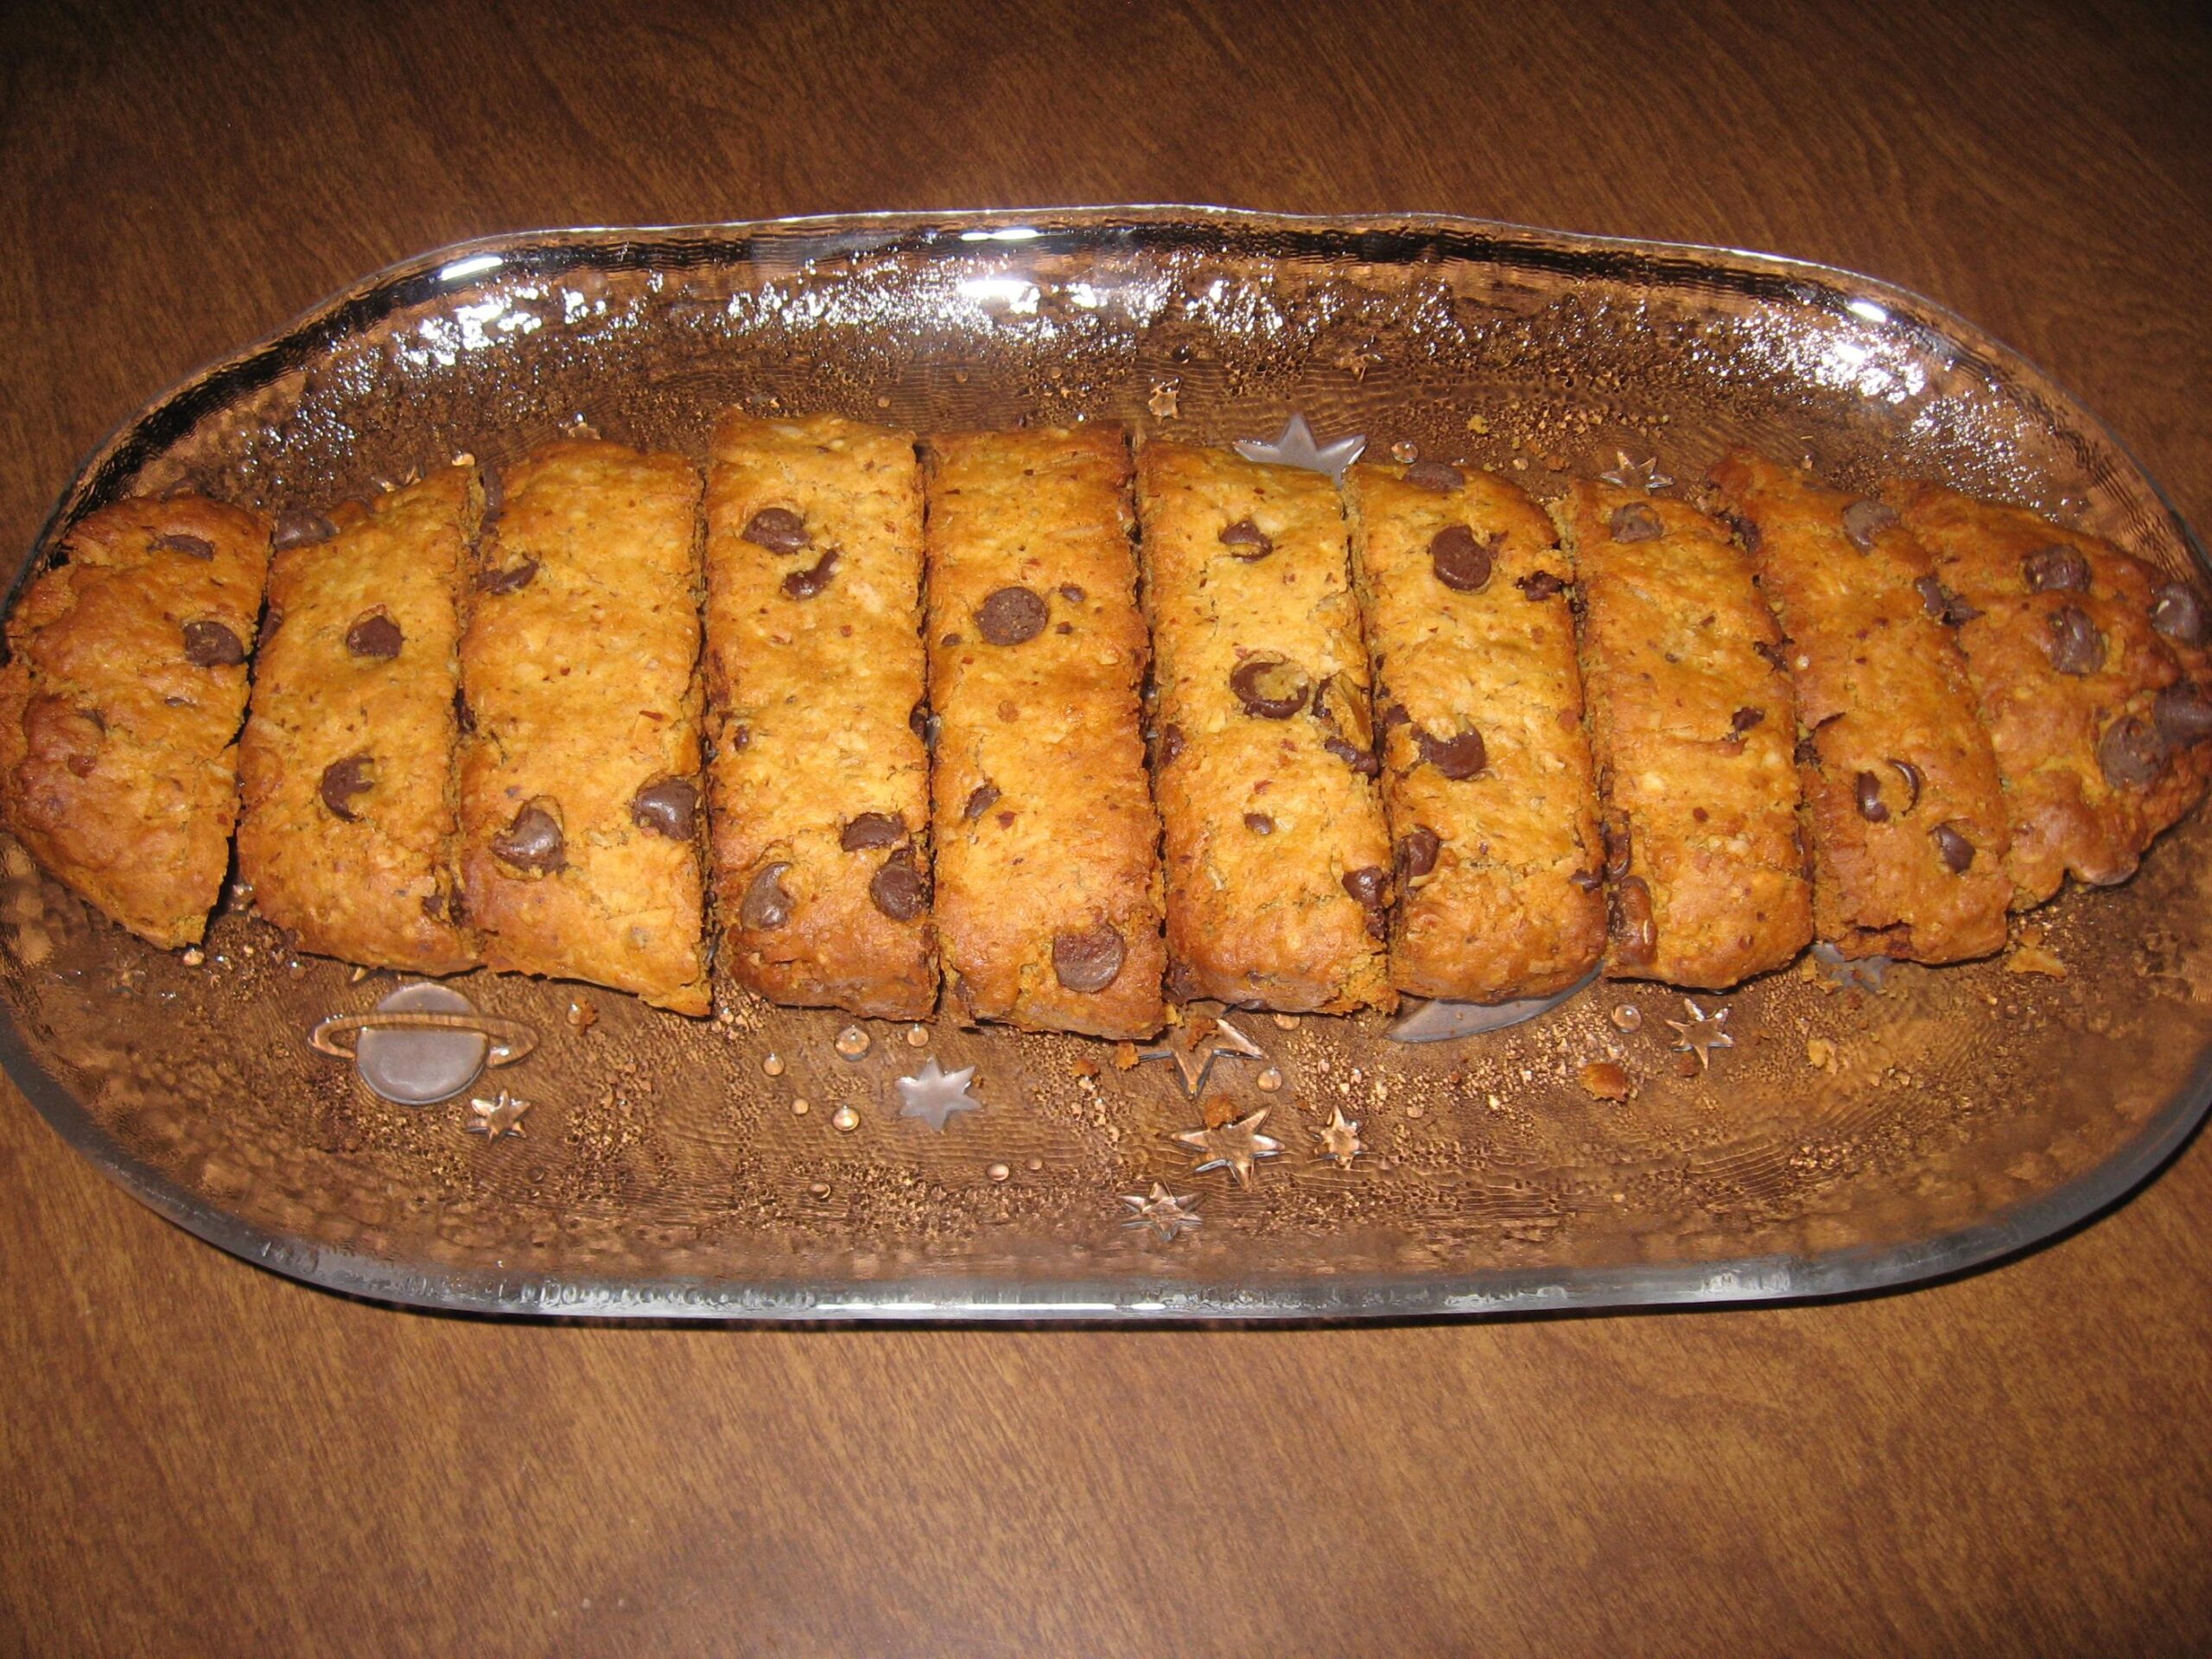  Get ready to fall in love with these crunchy gluten-free chocolate chip biscotti!